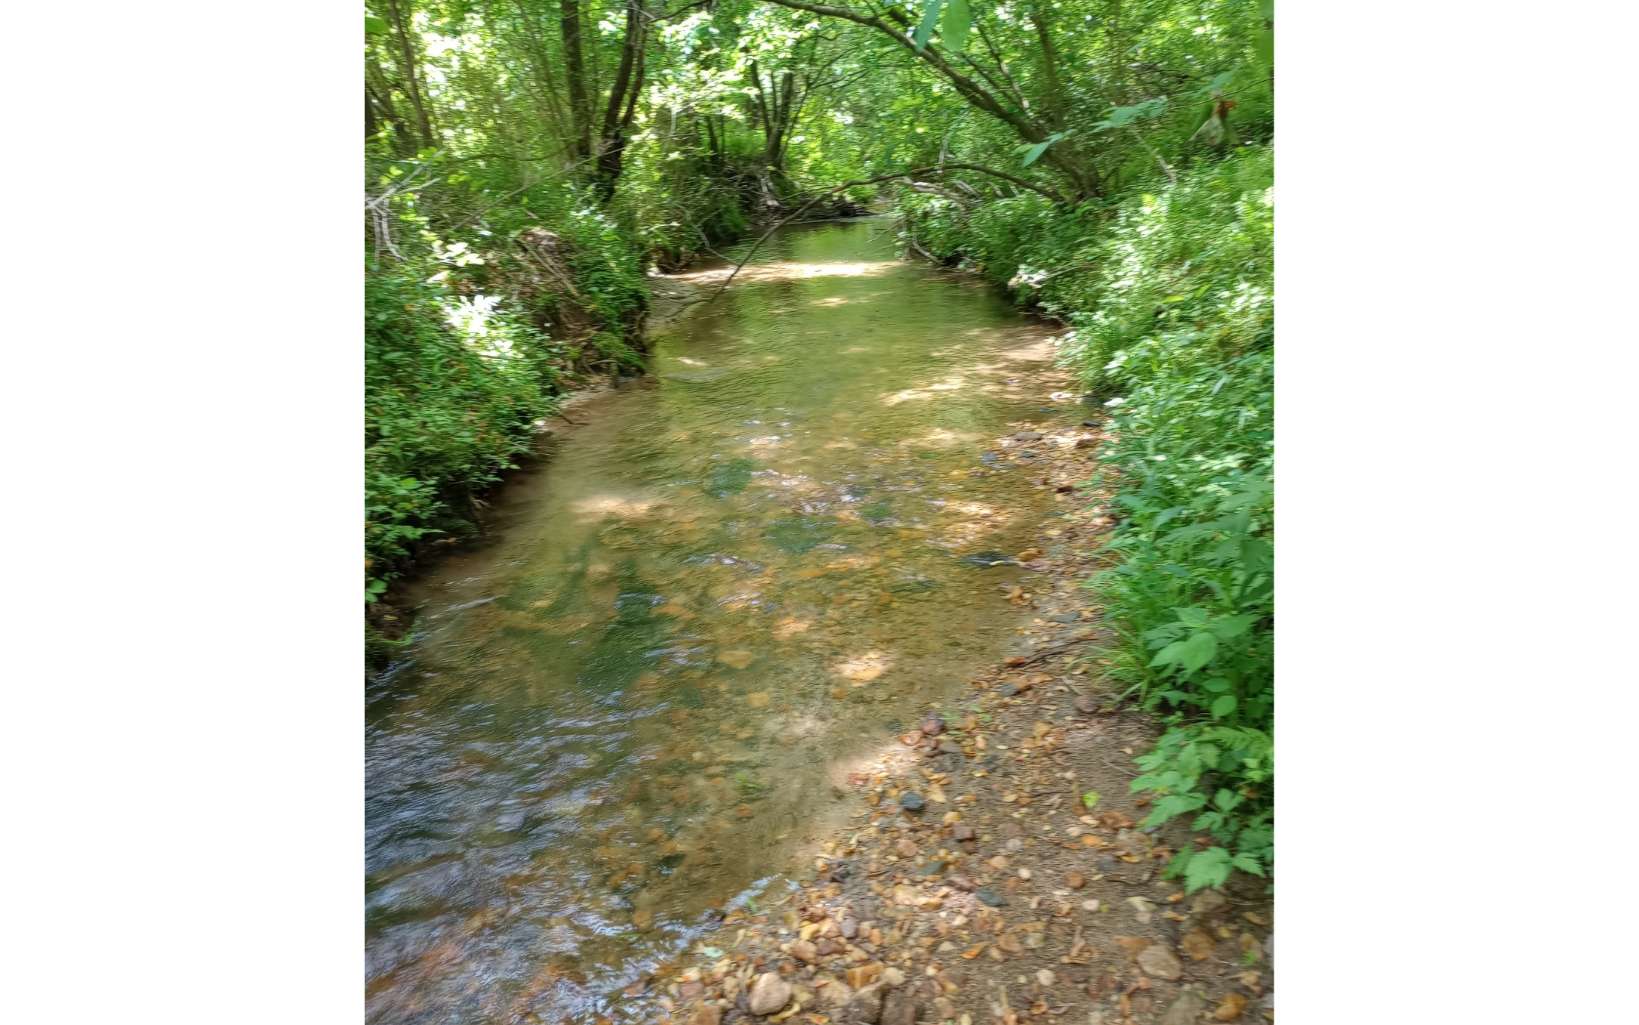 UNRESTRICTED CREEKFRONT 2 AC!! This one won't last! Bring your camper to use til you build. Private, all wooded, large trees, on a dead-end road with nearly 200' on lovely Stover Creek. See to appreciate! Located near USFS land and miles of hiking trails and rivers.